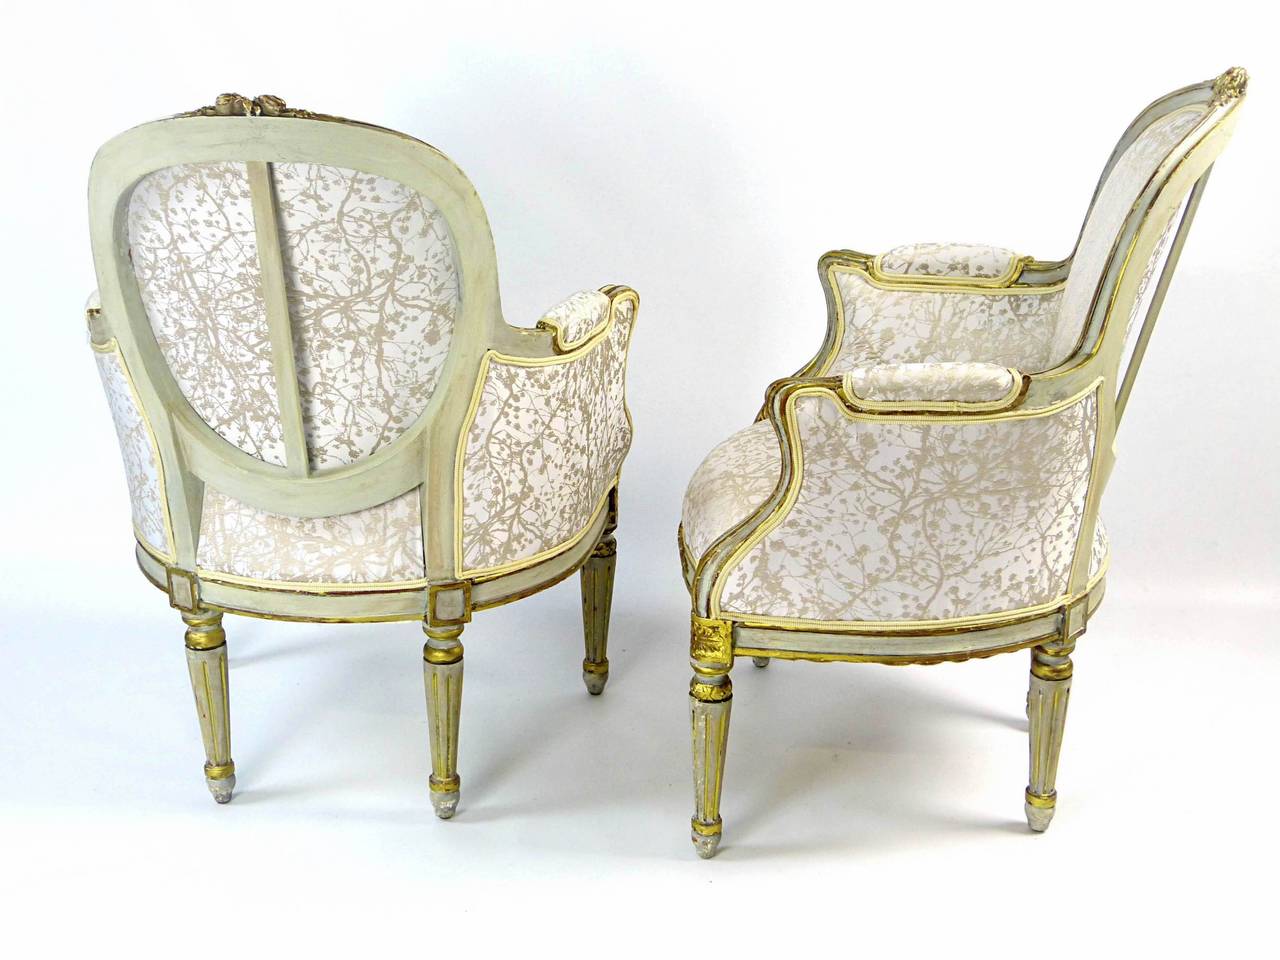 Attractive Louis XVI style bergeres dating to the last quarter of the 19th century with arched backs, serpentine fronts and with discreet carvings throughout, supported by turned and reeded tapering legs. The underlying wood is beechwood painted